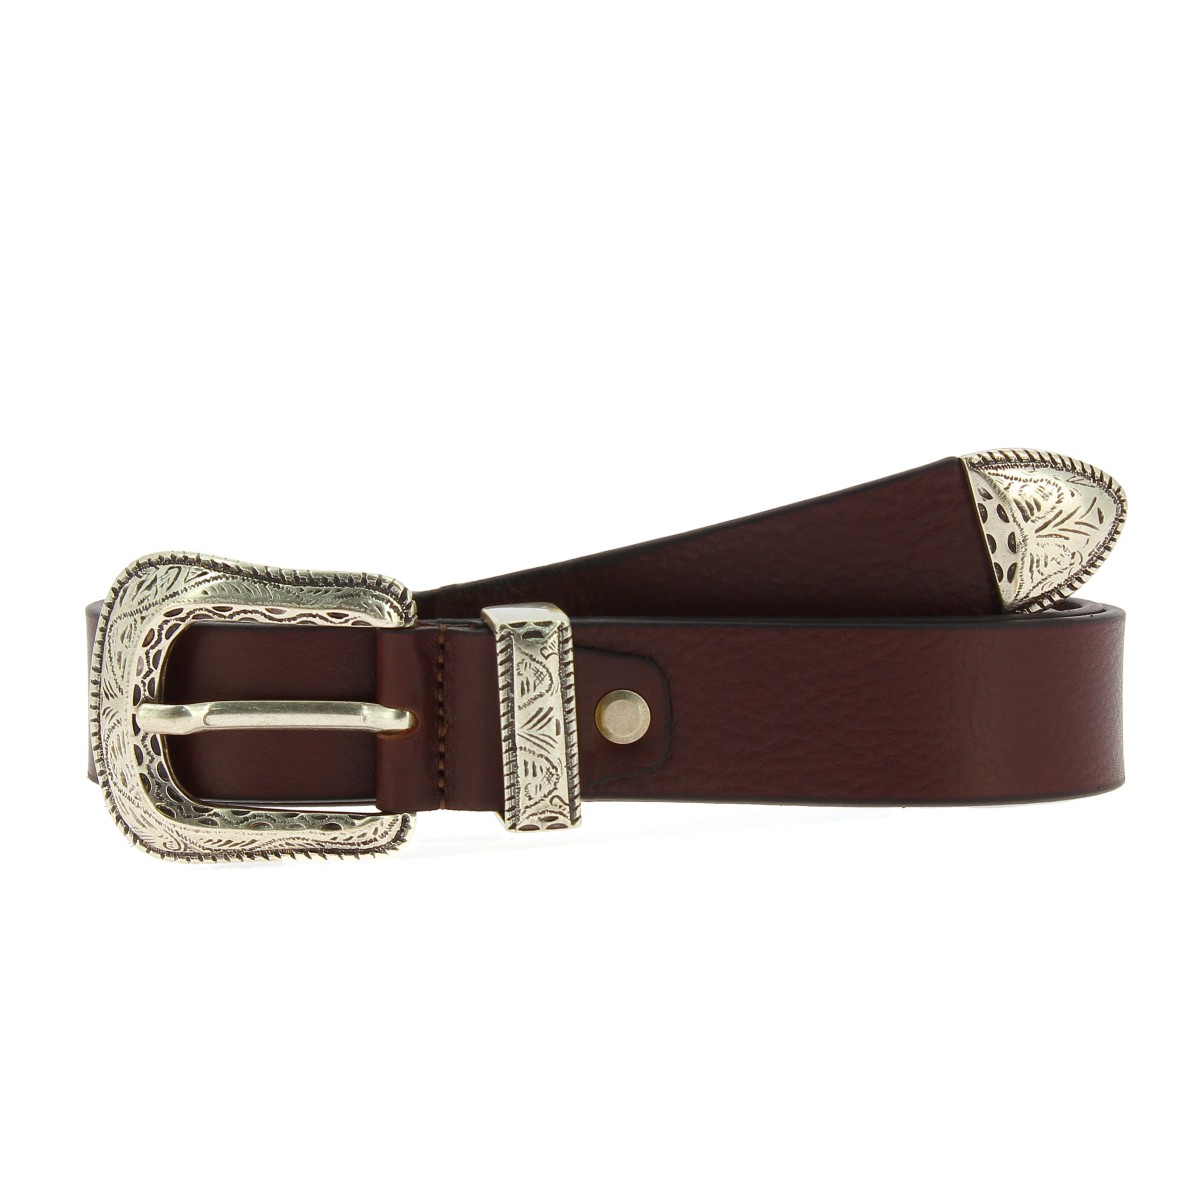 Dark brown leather belt with engraved metal buckle and tip | The ...